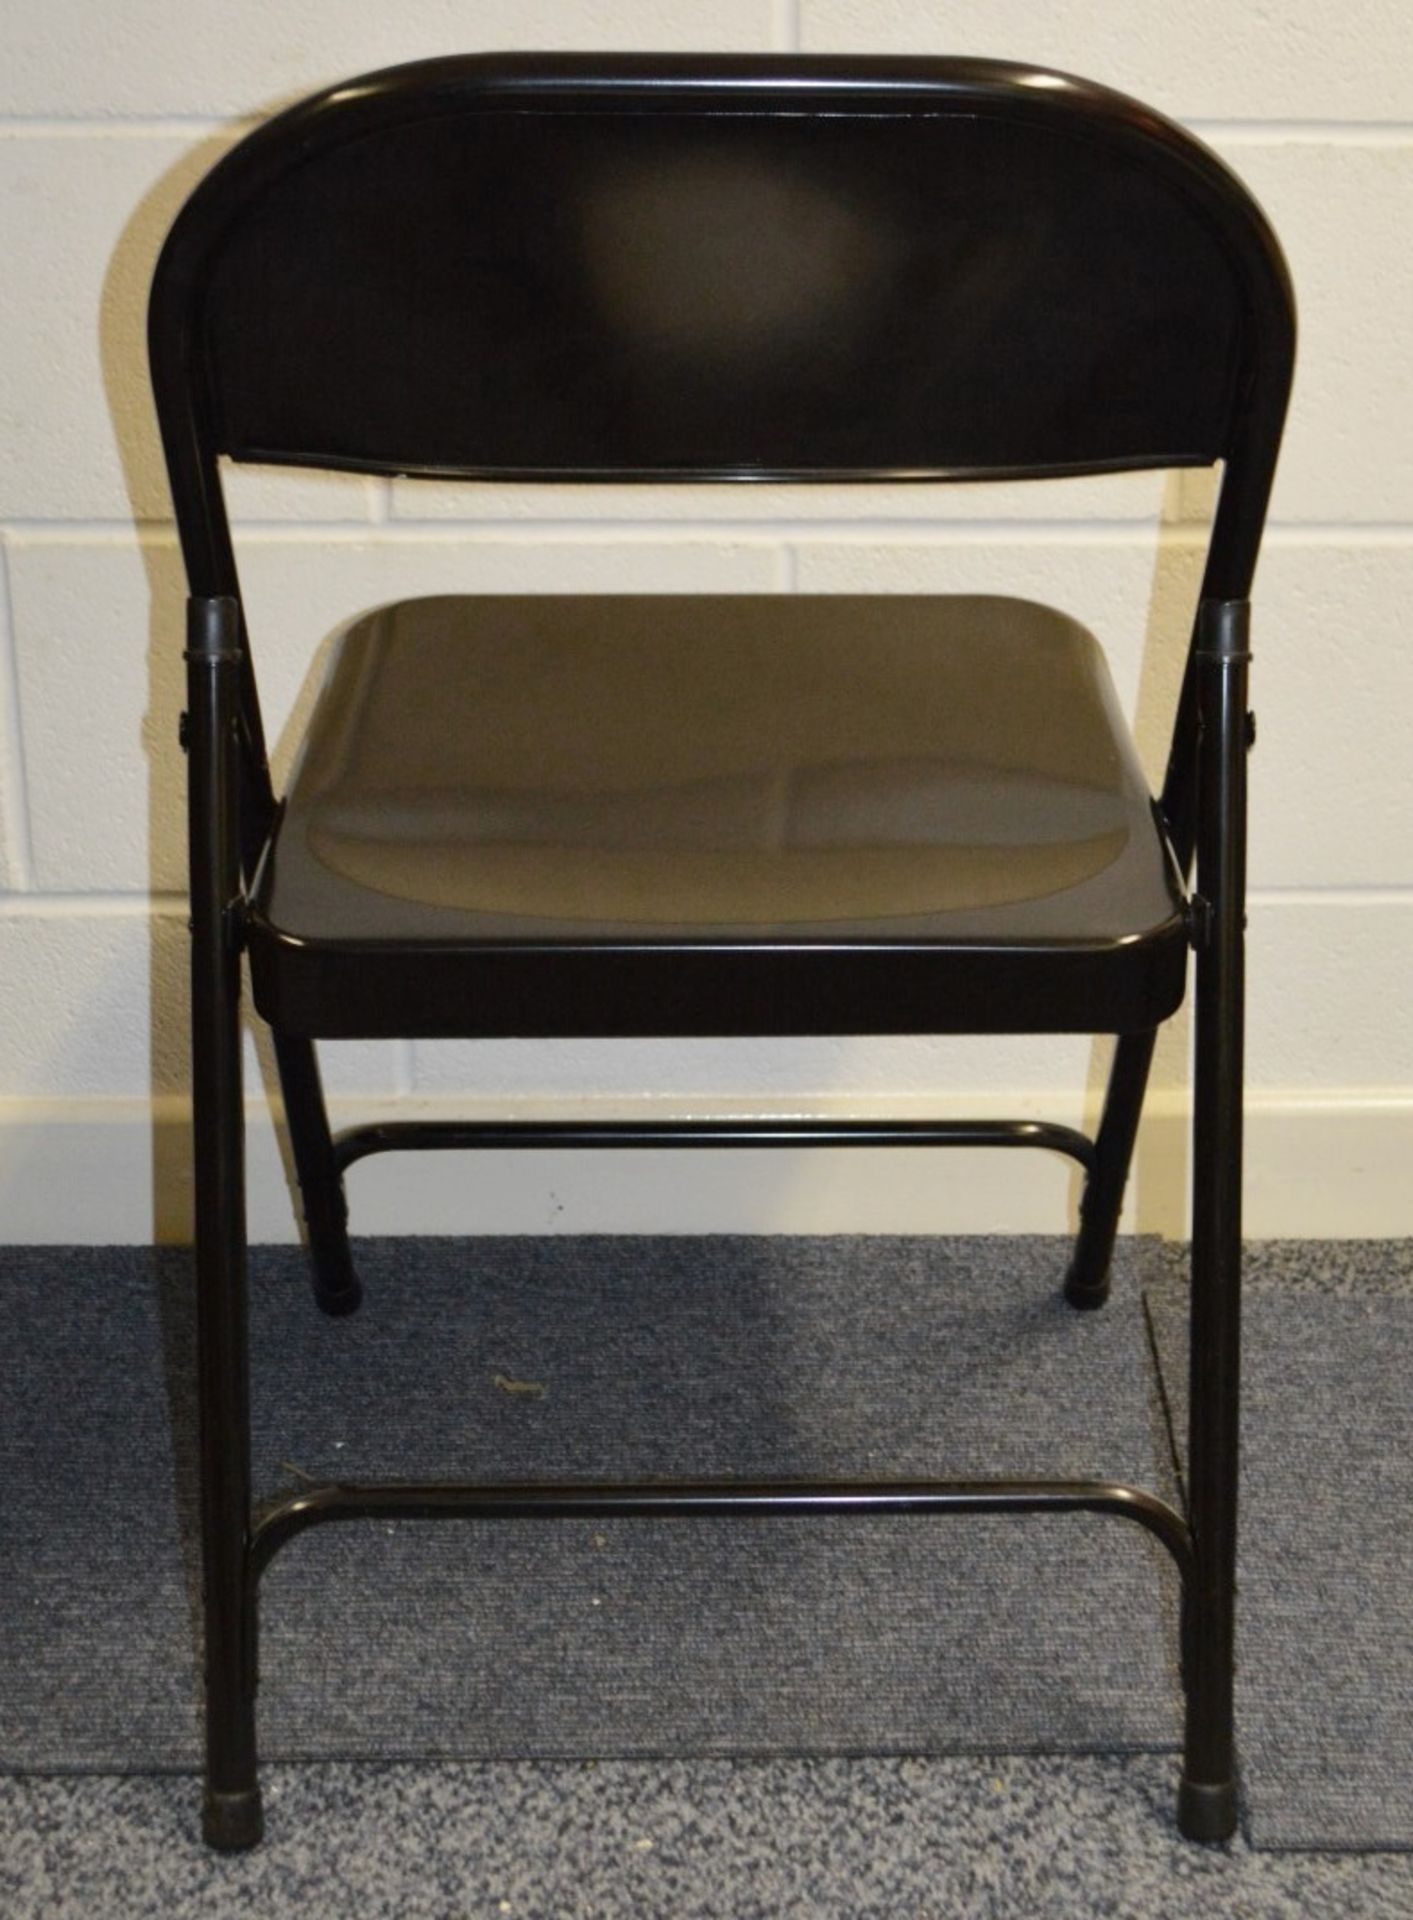 3 x HABITAT Folding Metal Chairs In Black - Dimensions: W47 x D50 x H80, Seat Height cm - Used, In - Image 2 of 4